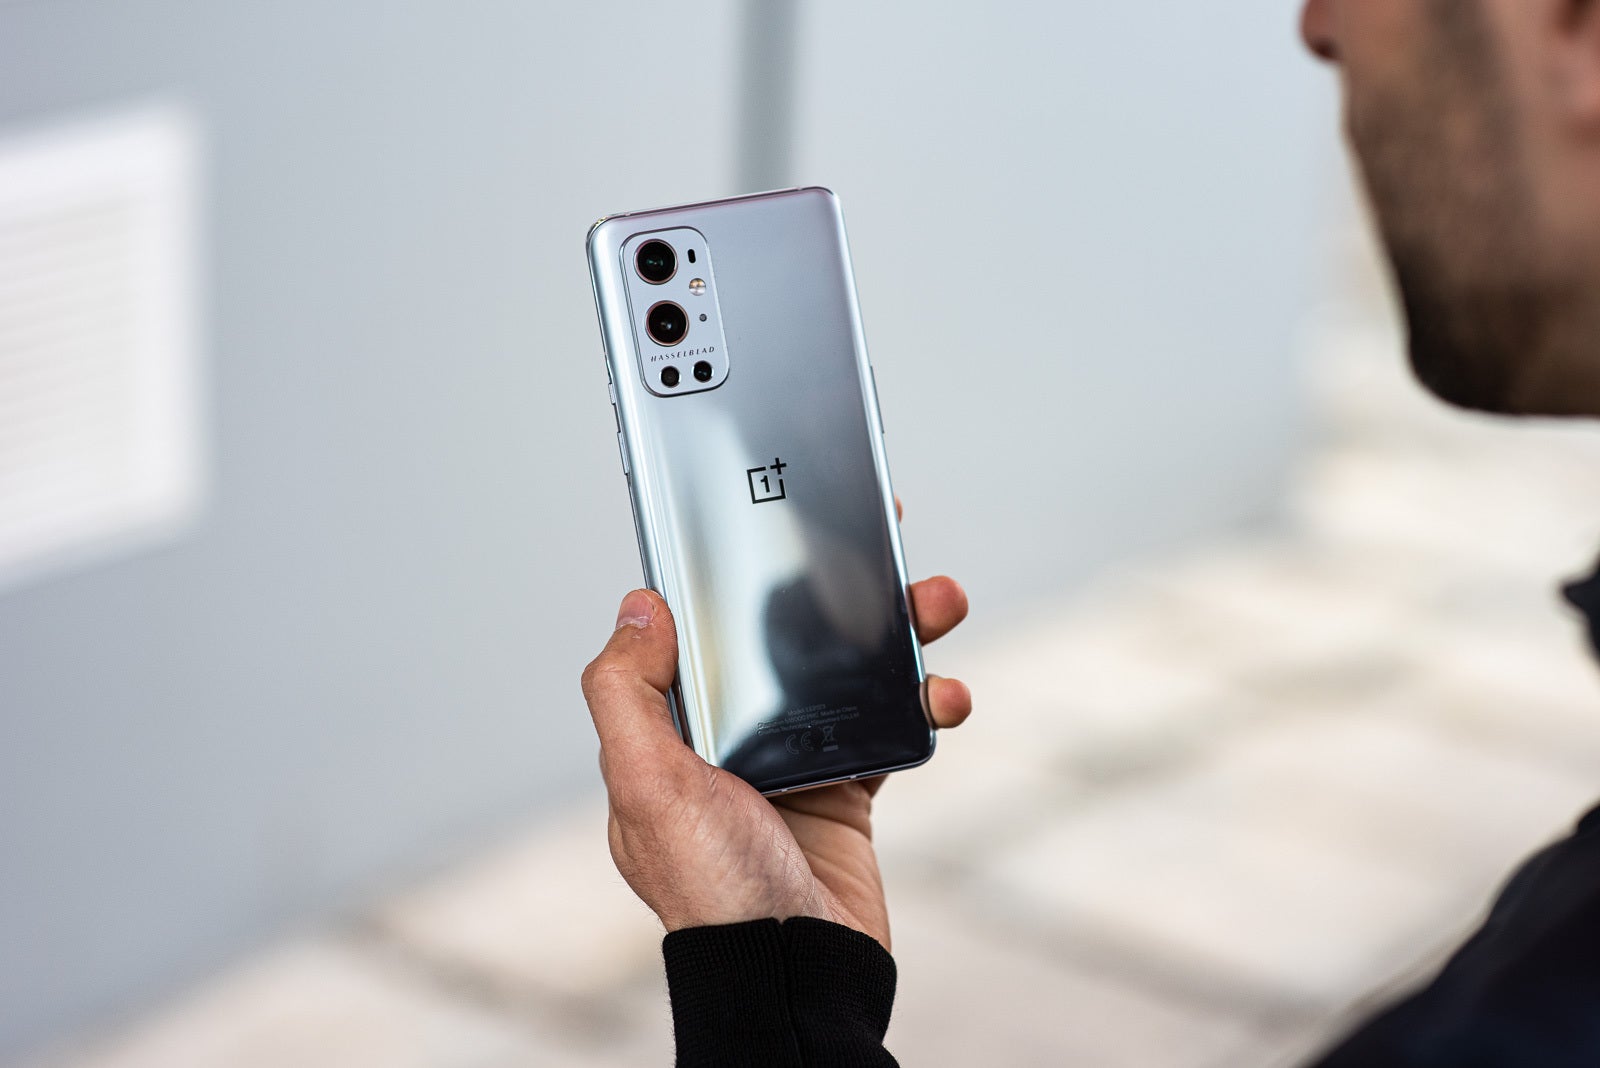 OnePlus Black Friday 2022 deals: the offers are coming